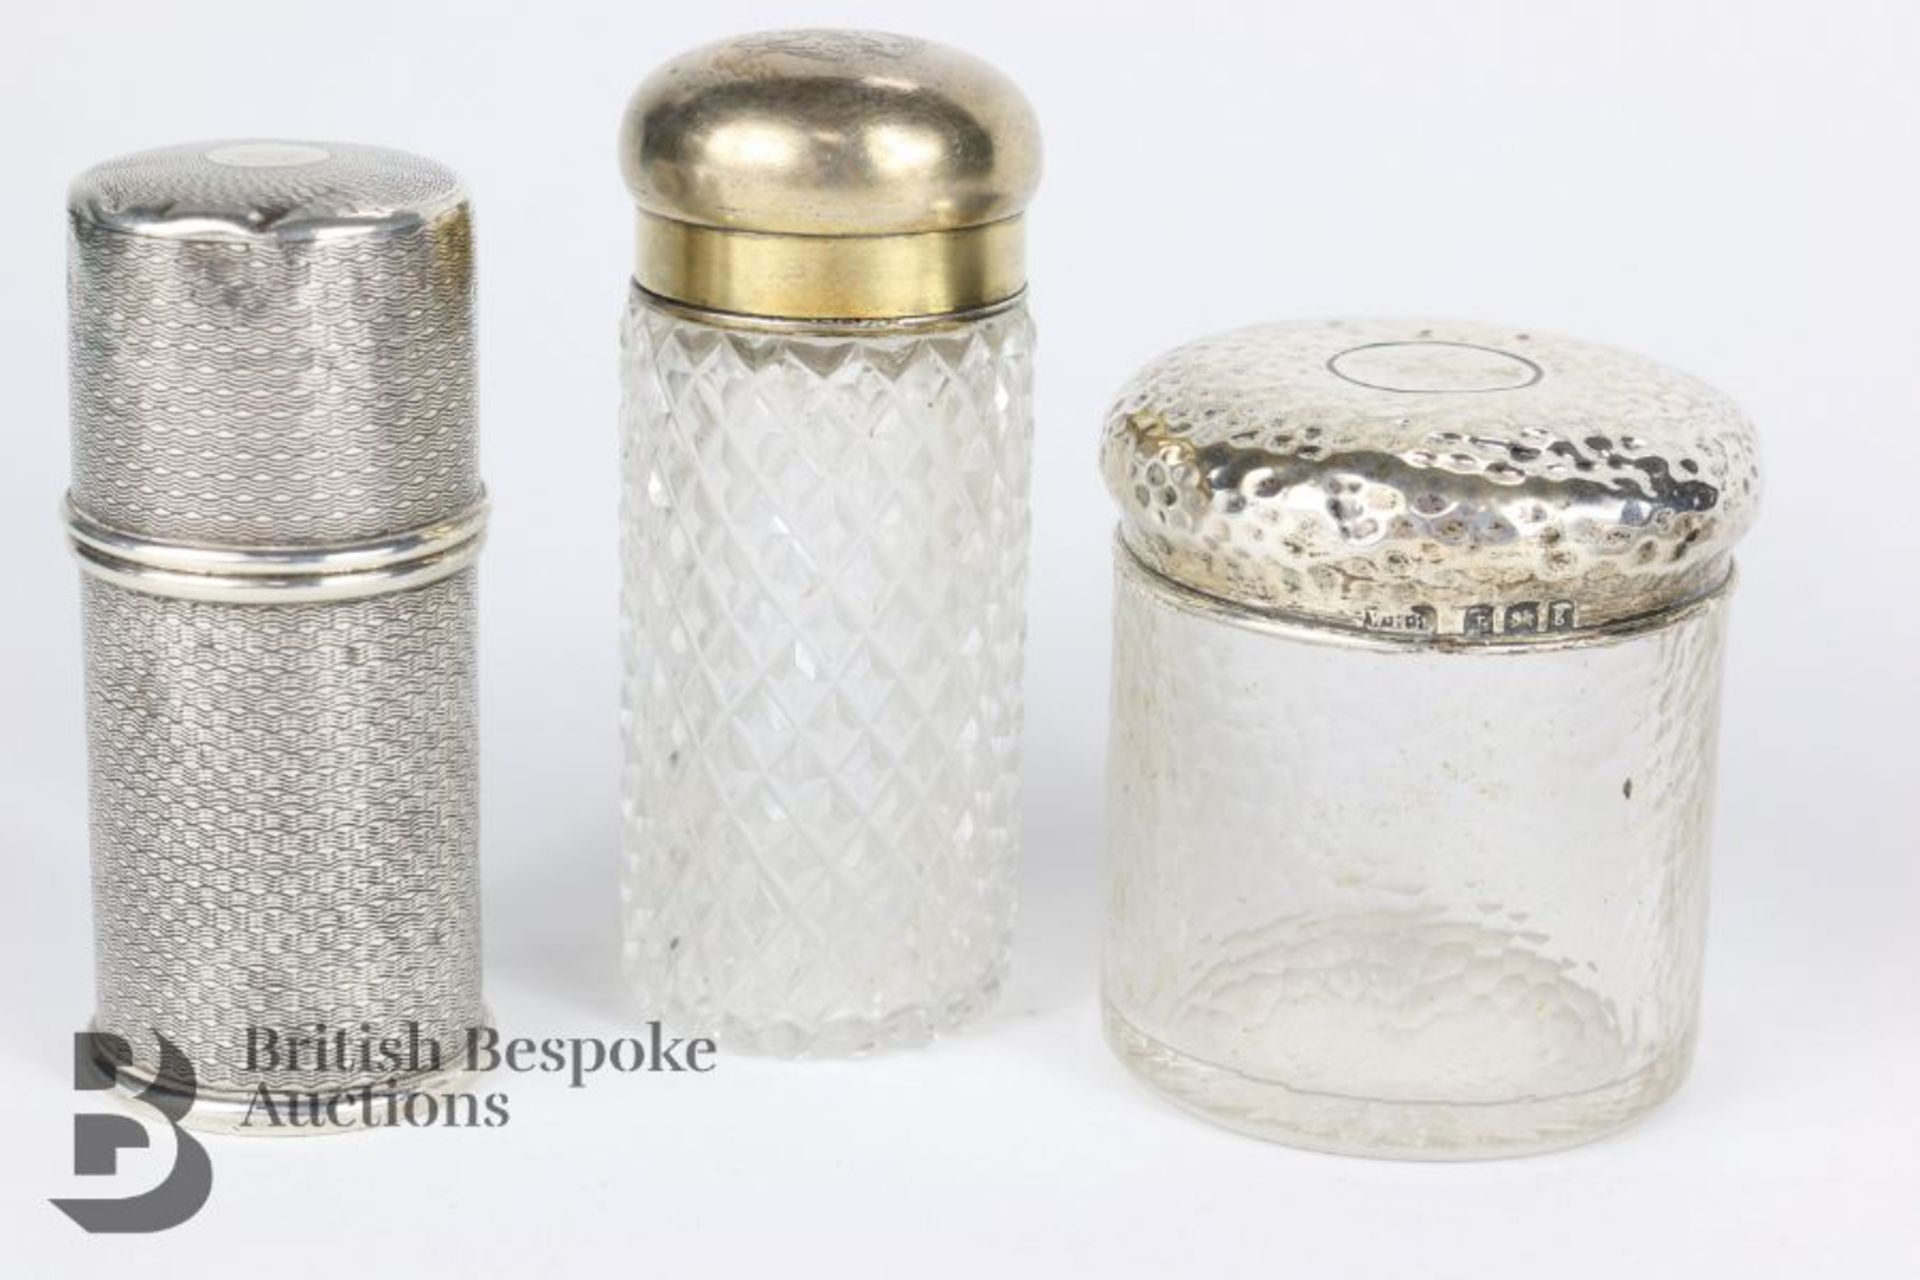 Georgian Scent Bottle and Glass Hunting Flask - Image 13 of 17